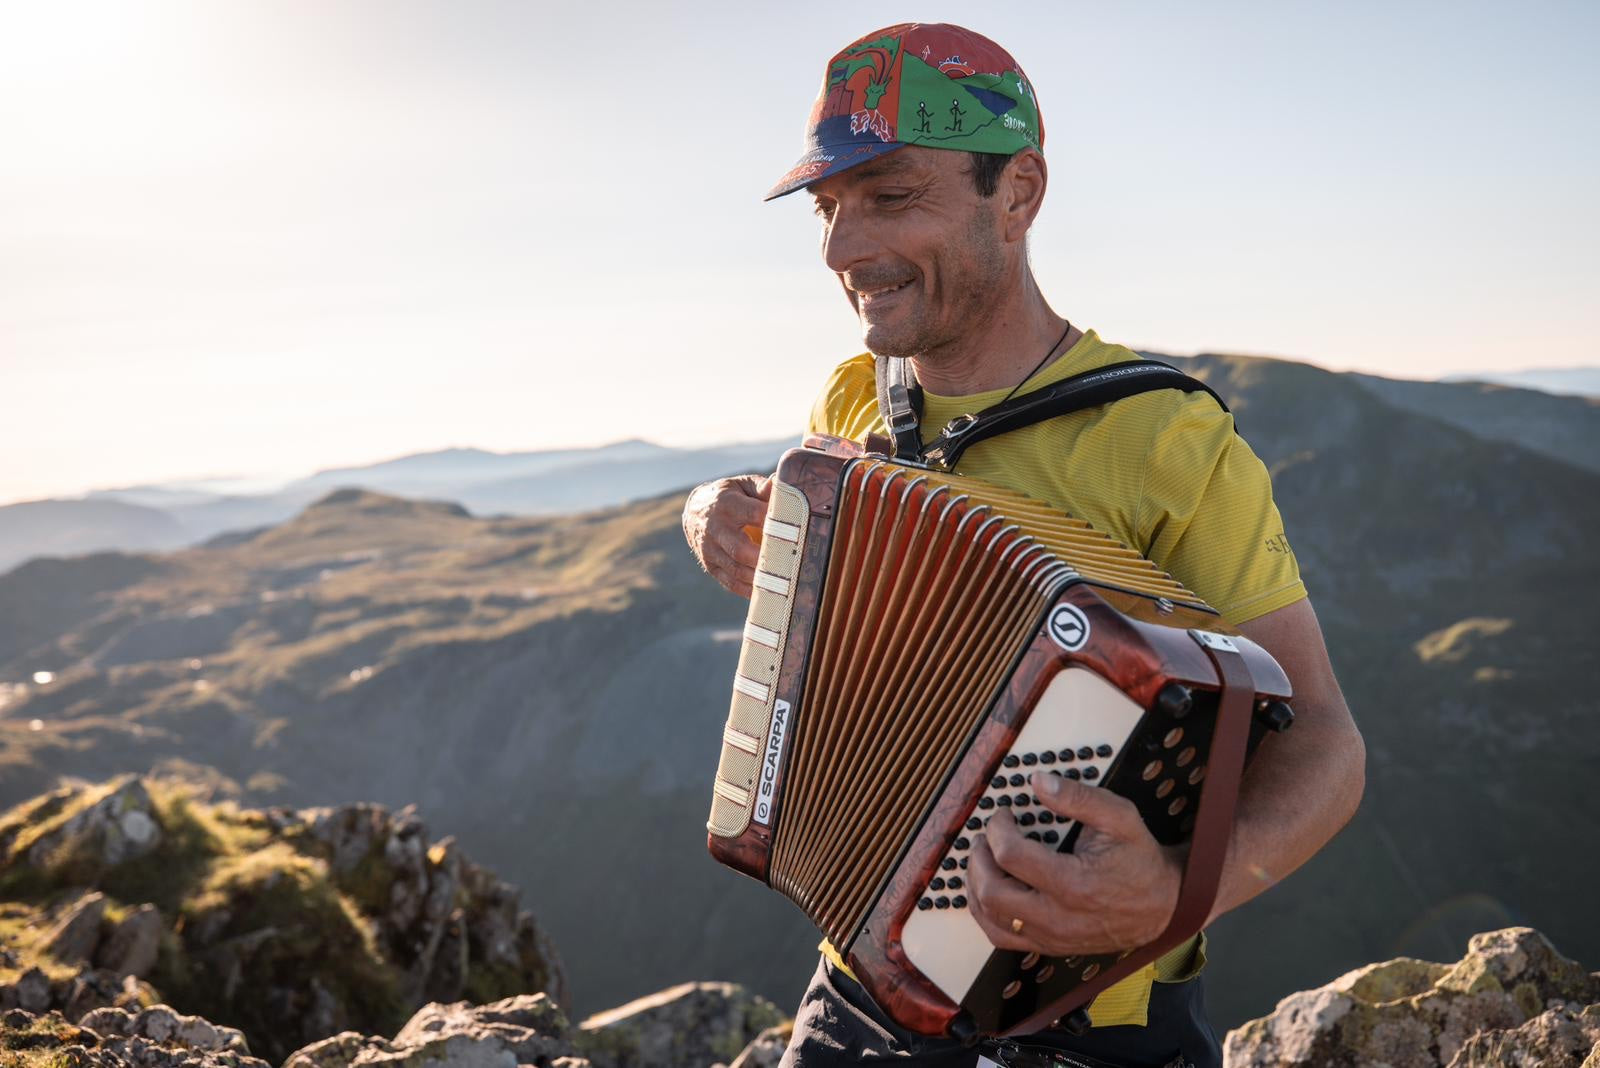 Running the Dragon's Back Race with an Accordion!